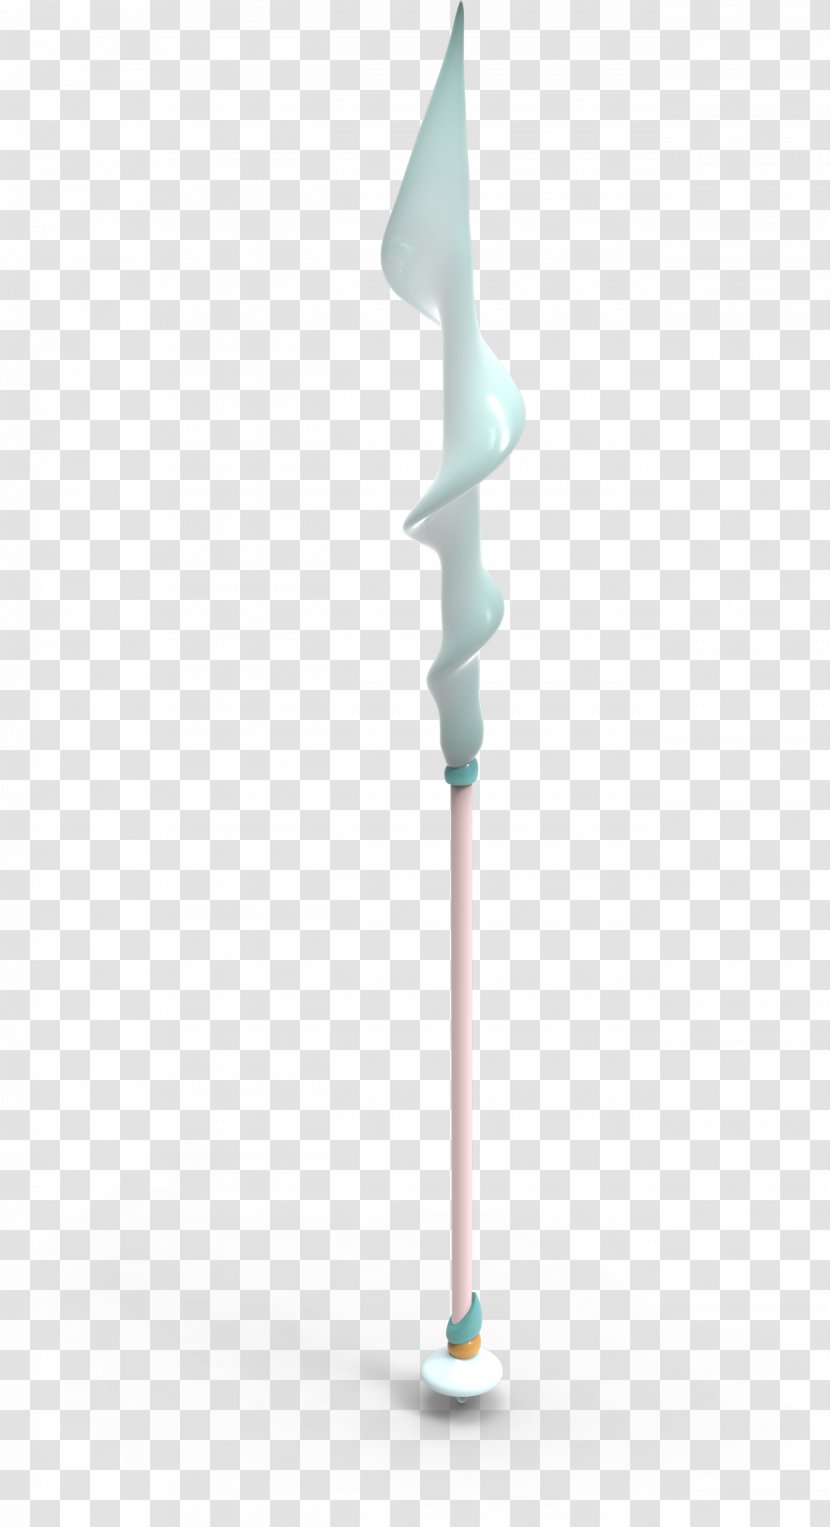 Household Cleaning Supply Angle - Spear Transparent PNG